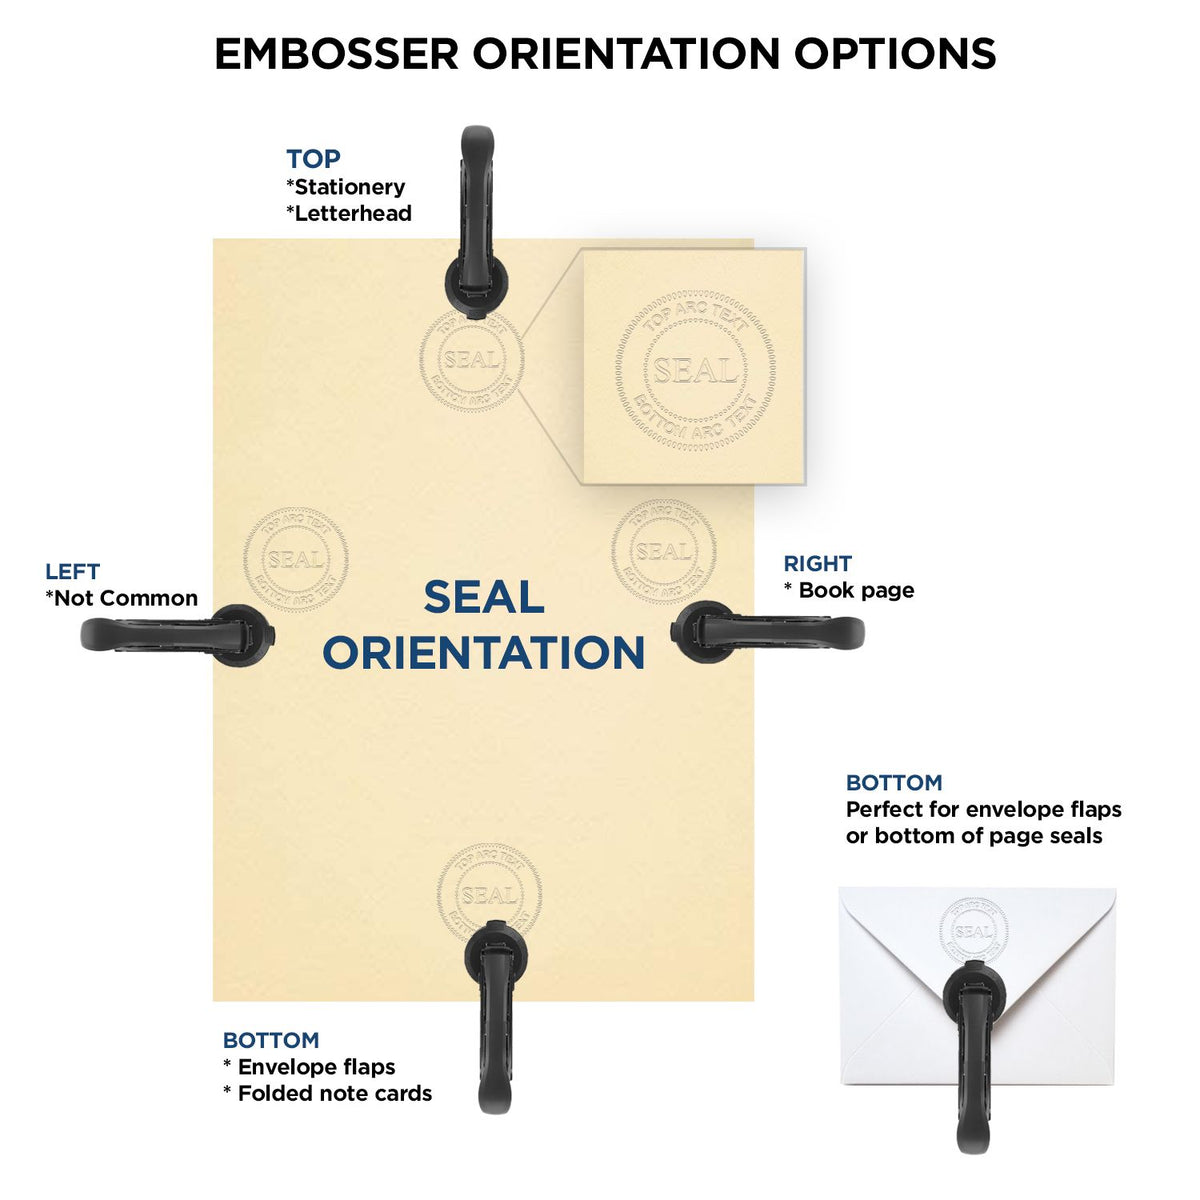 An infographic for the Alabama Desk Surveyor Seal Embosser showing embosser orientation, this is showing examples of a top, bottom, right and left insert.